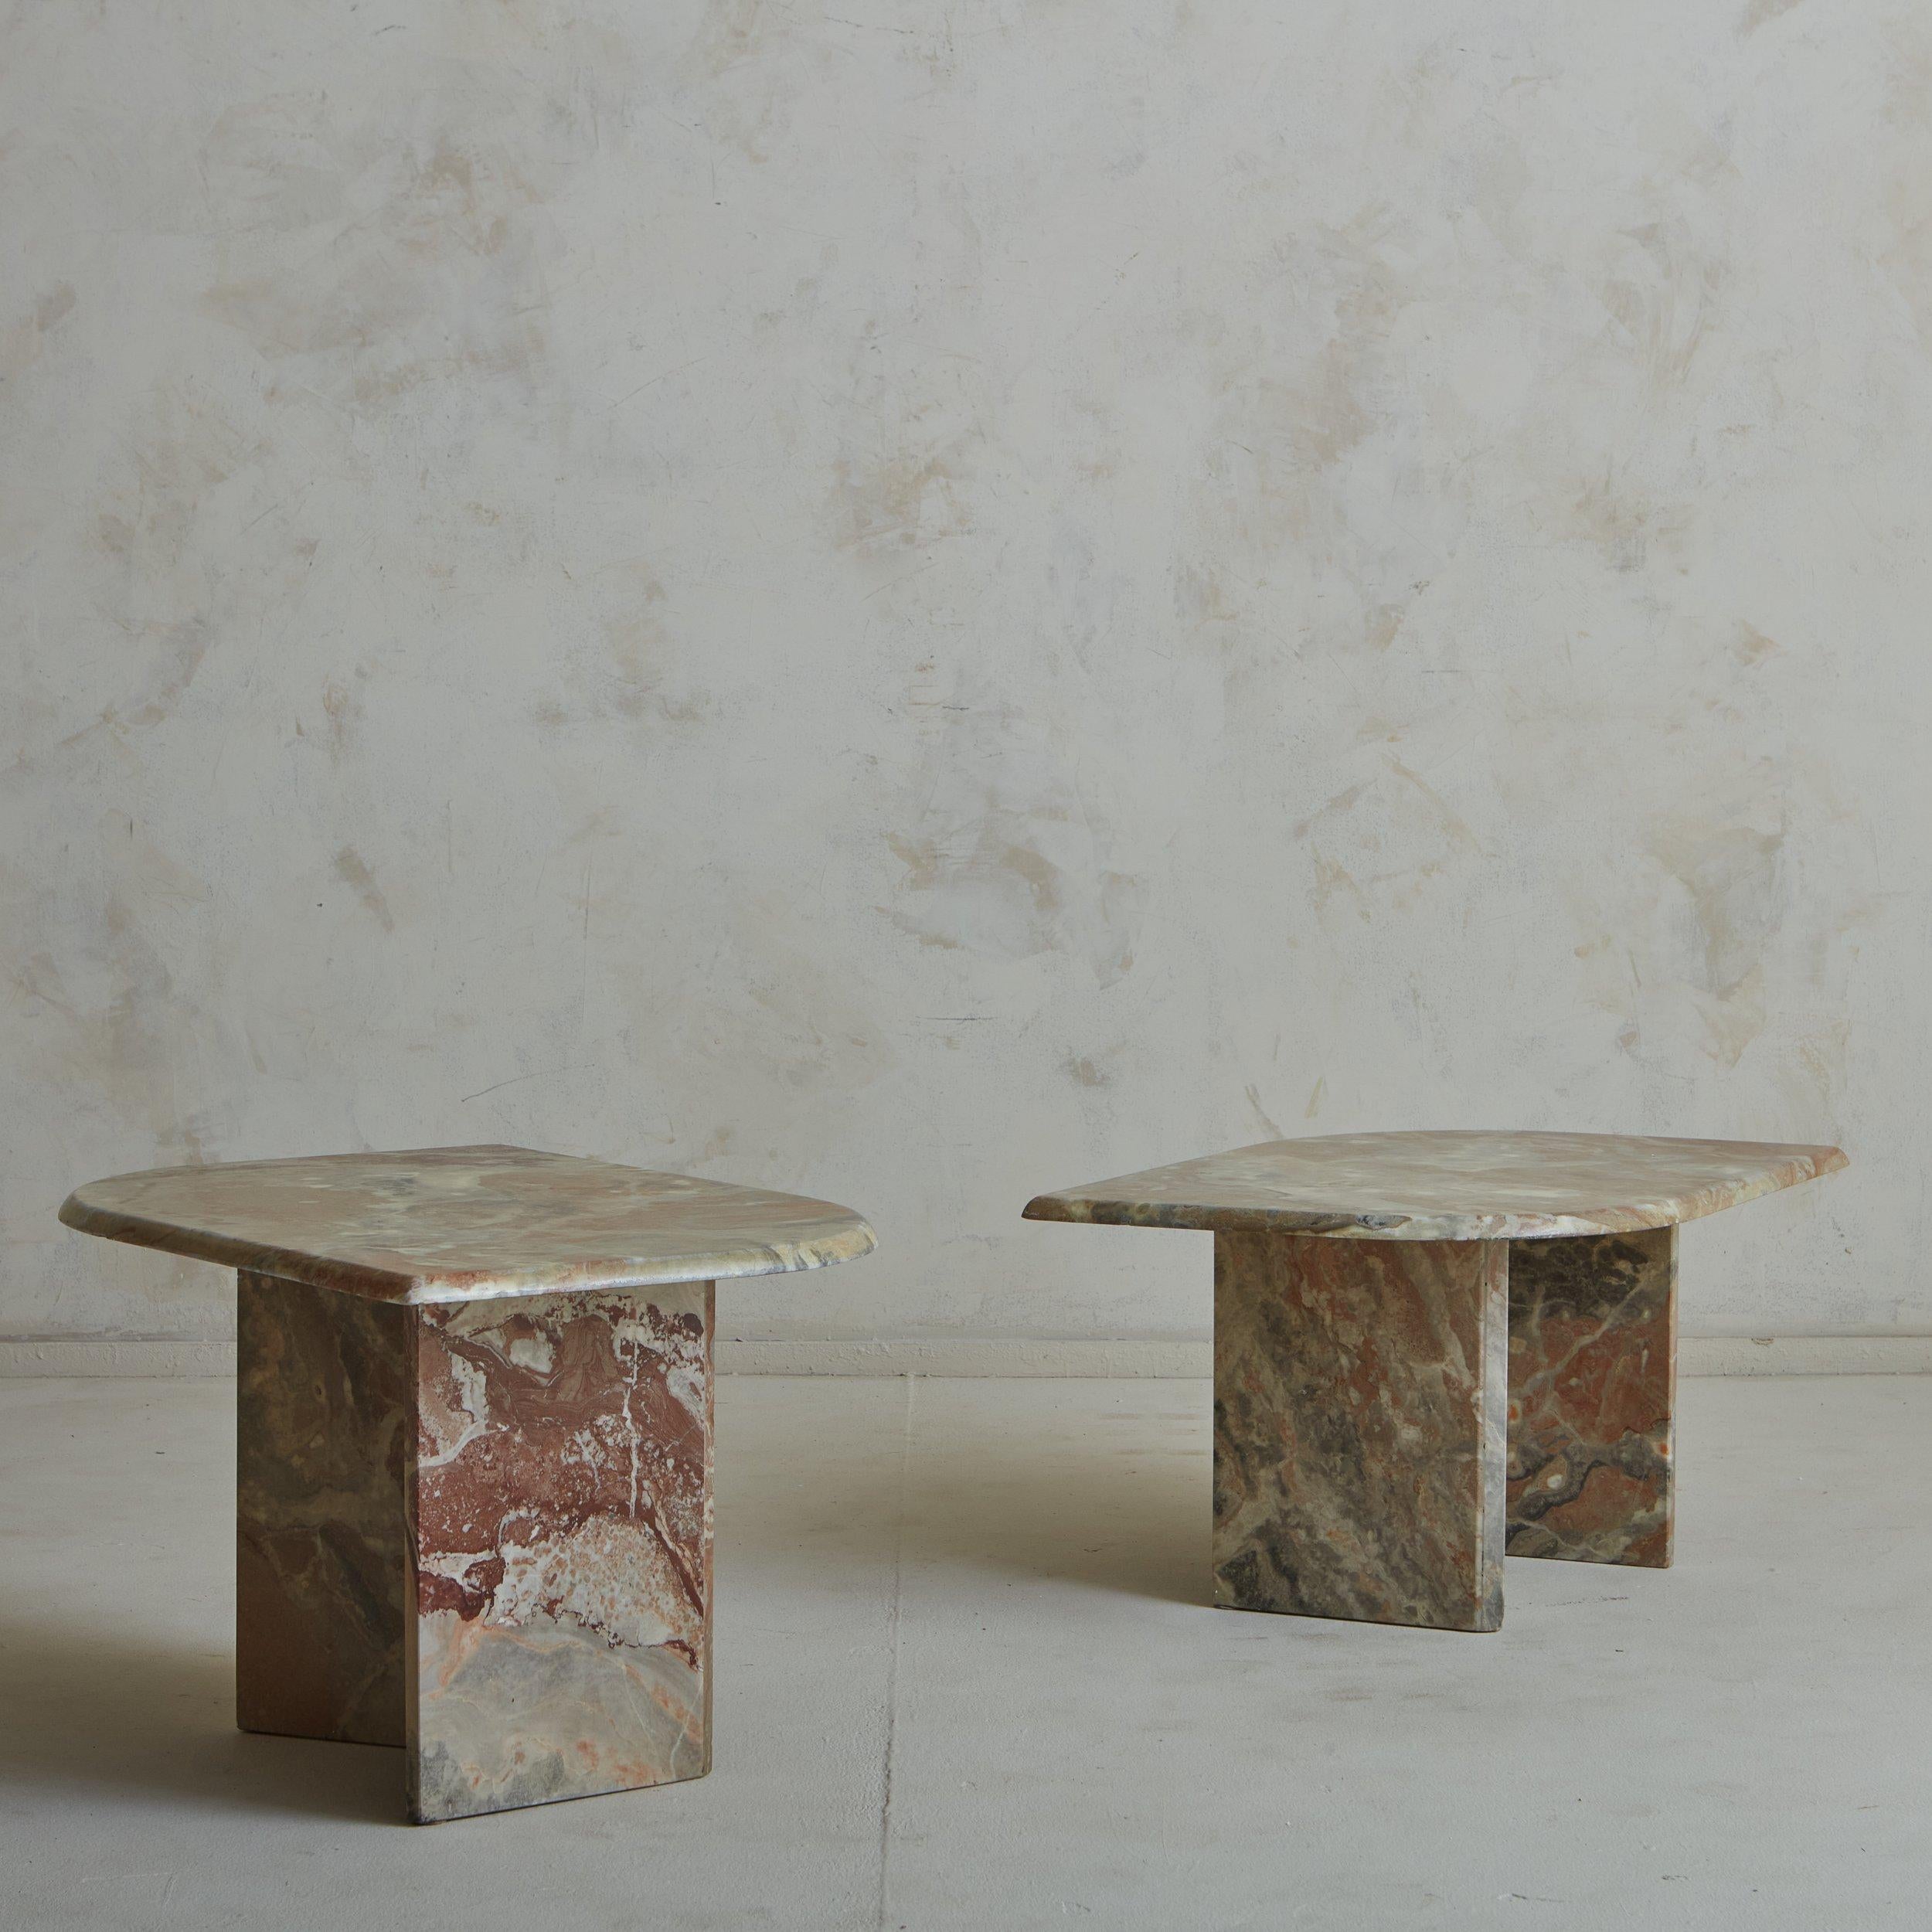 A pair of vintage French side tables constructed with gorgeously veined marble in a range of taupe, cream and rust hues. These tables have teardrop shaped tops and angular bases. One table is slightly shorter than the other, allowing them to nest